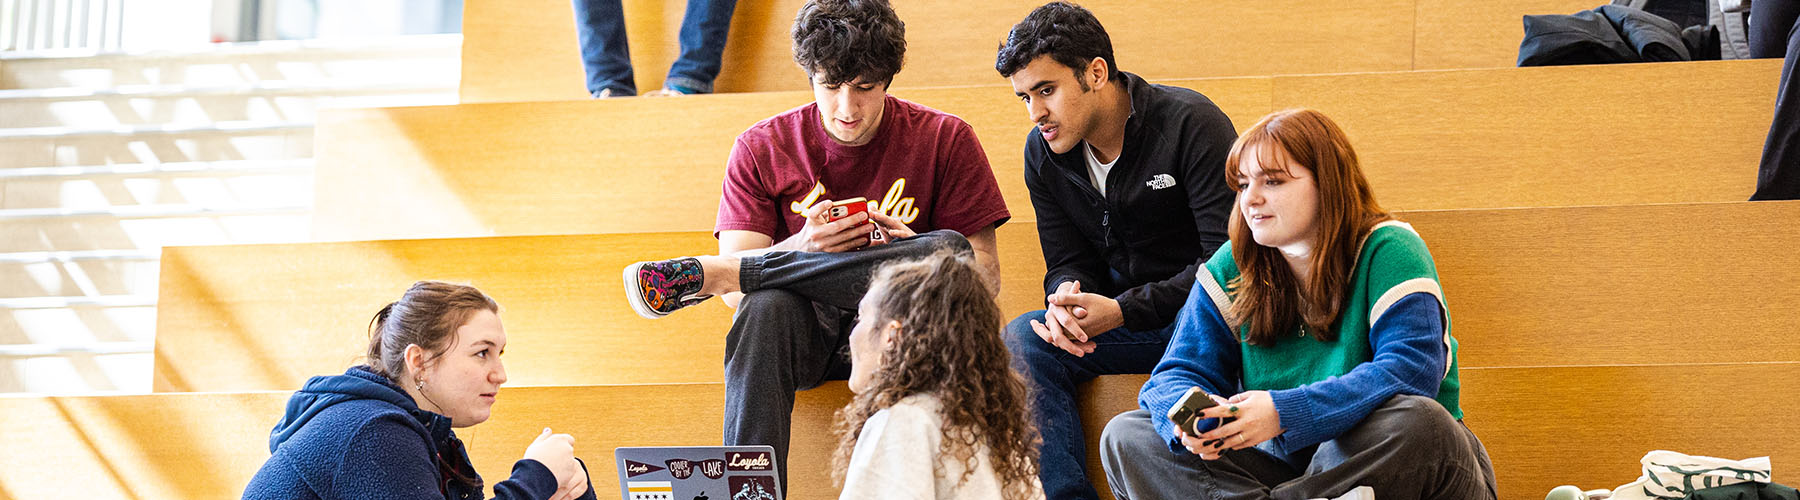 A group of Loyola students converse inside of the Schreiber Center